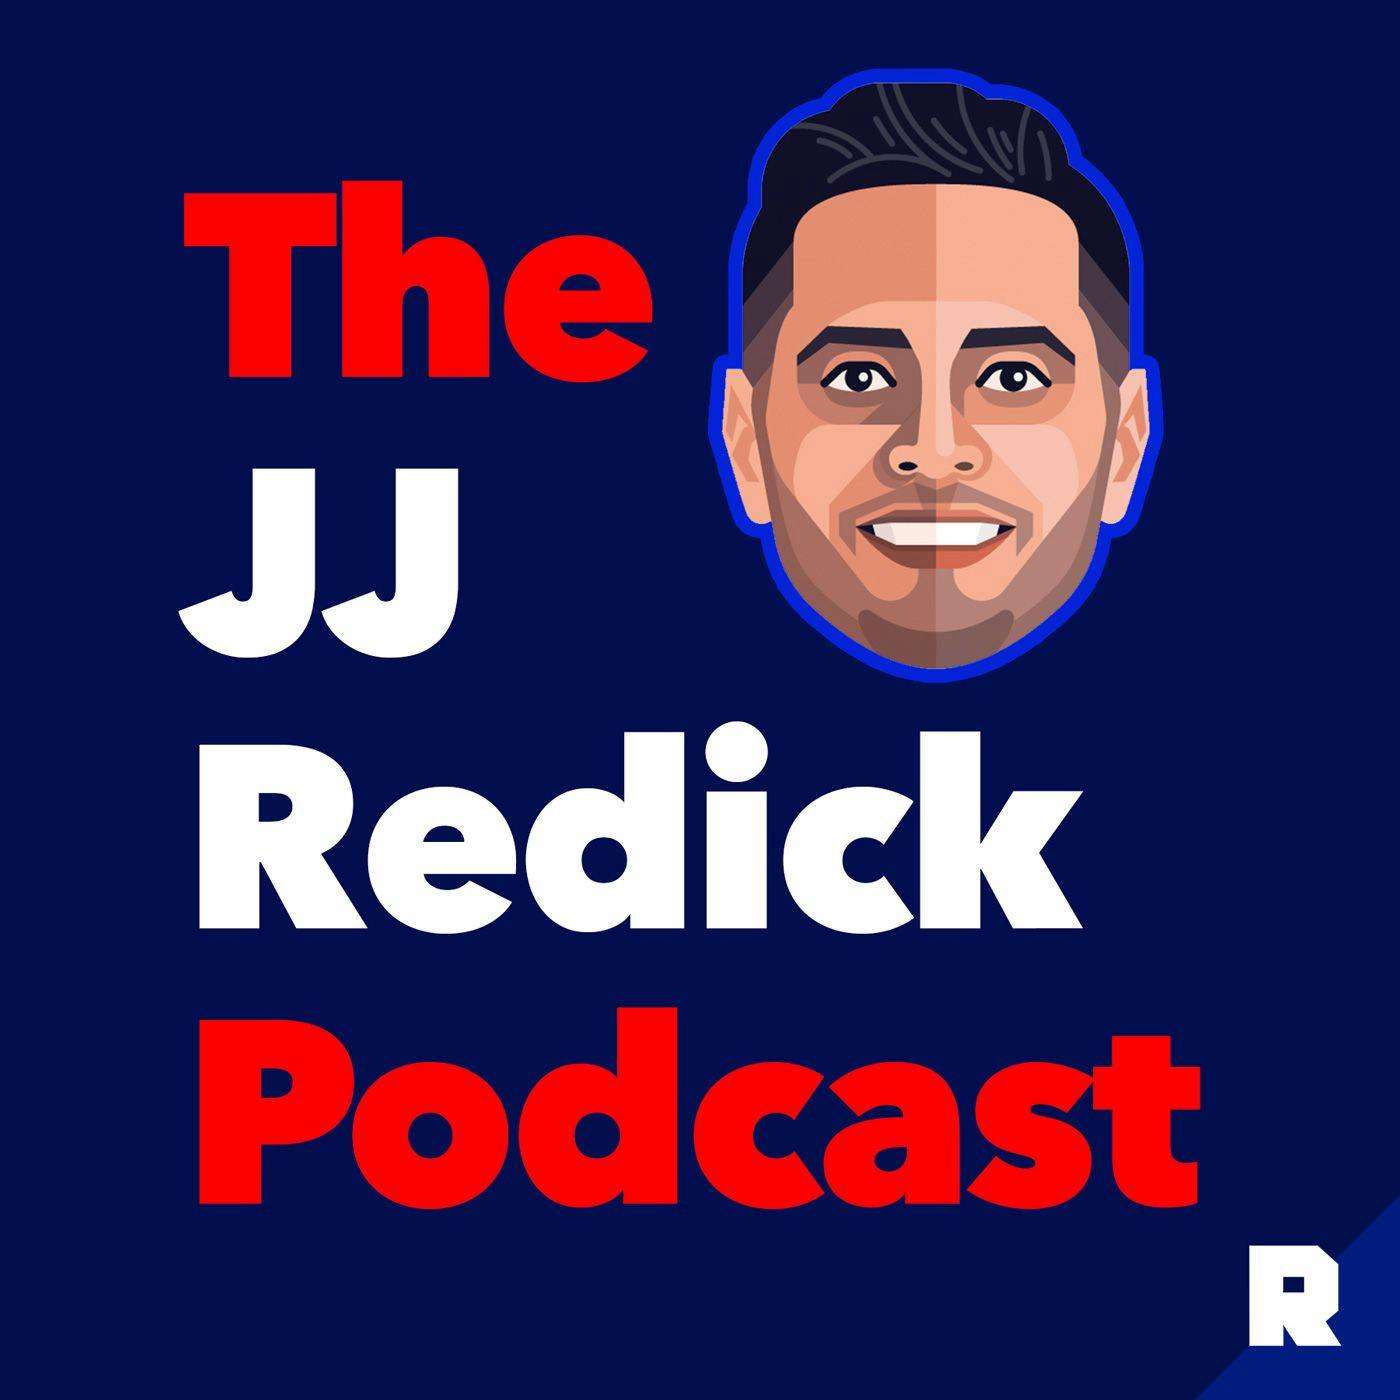 J.J Redick's podcast logo, the last step in his case to become a Hall of Famer